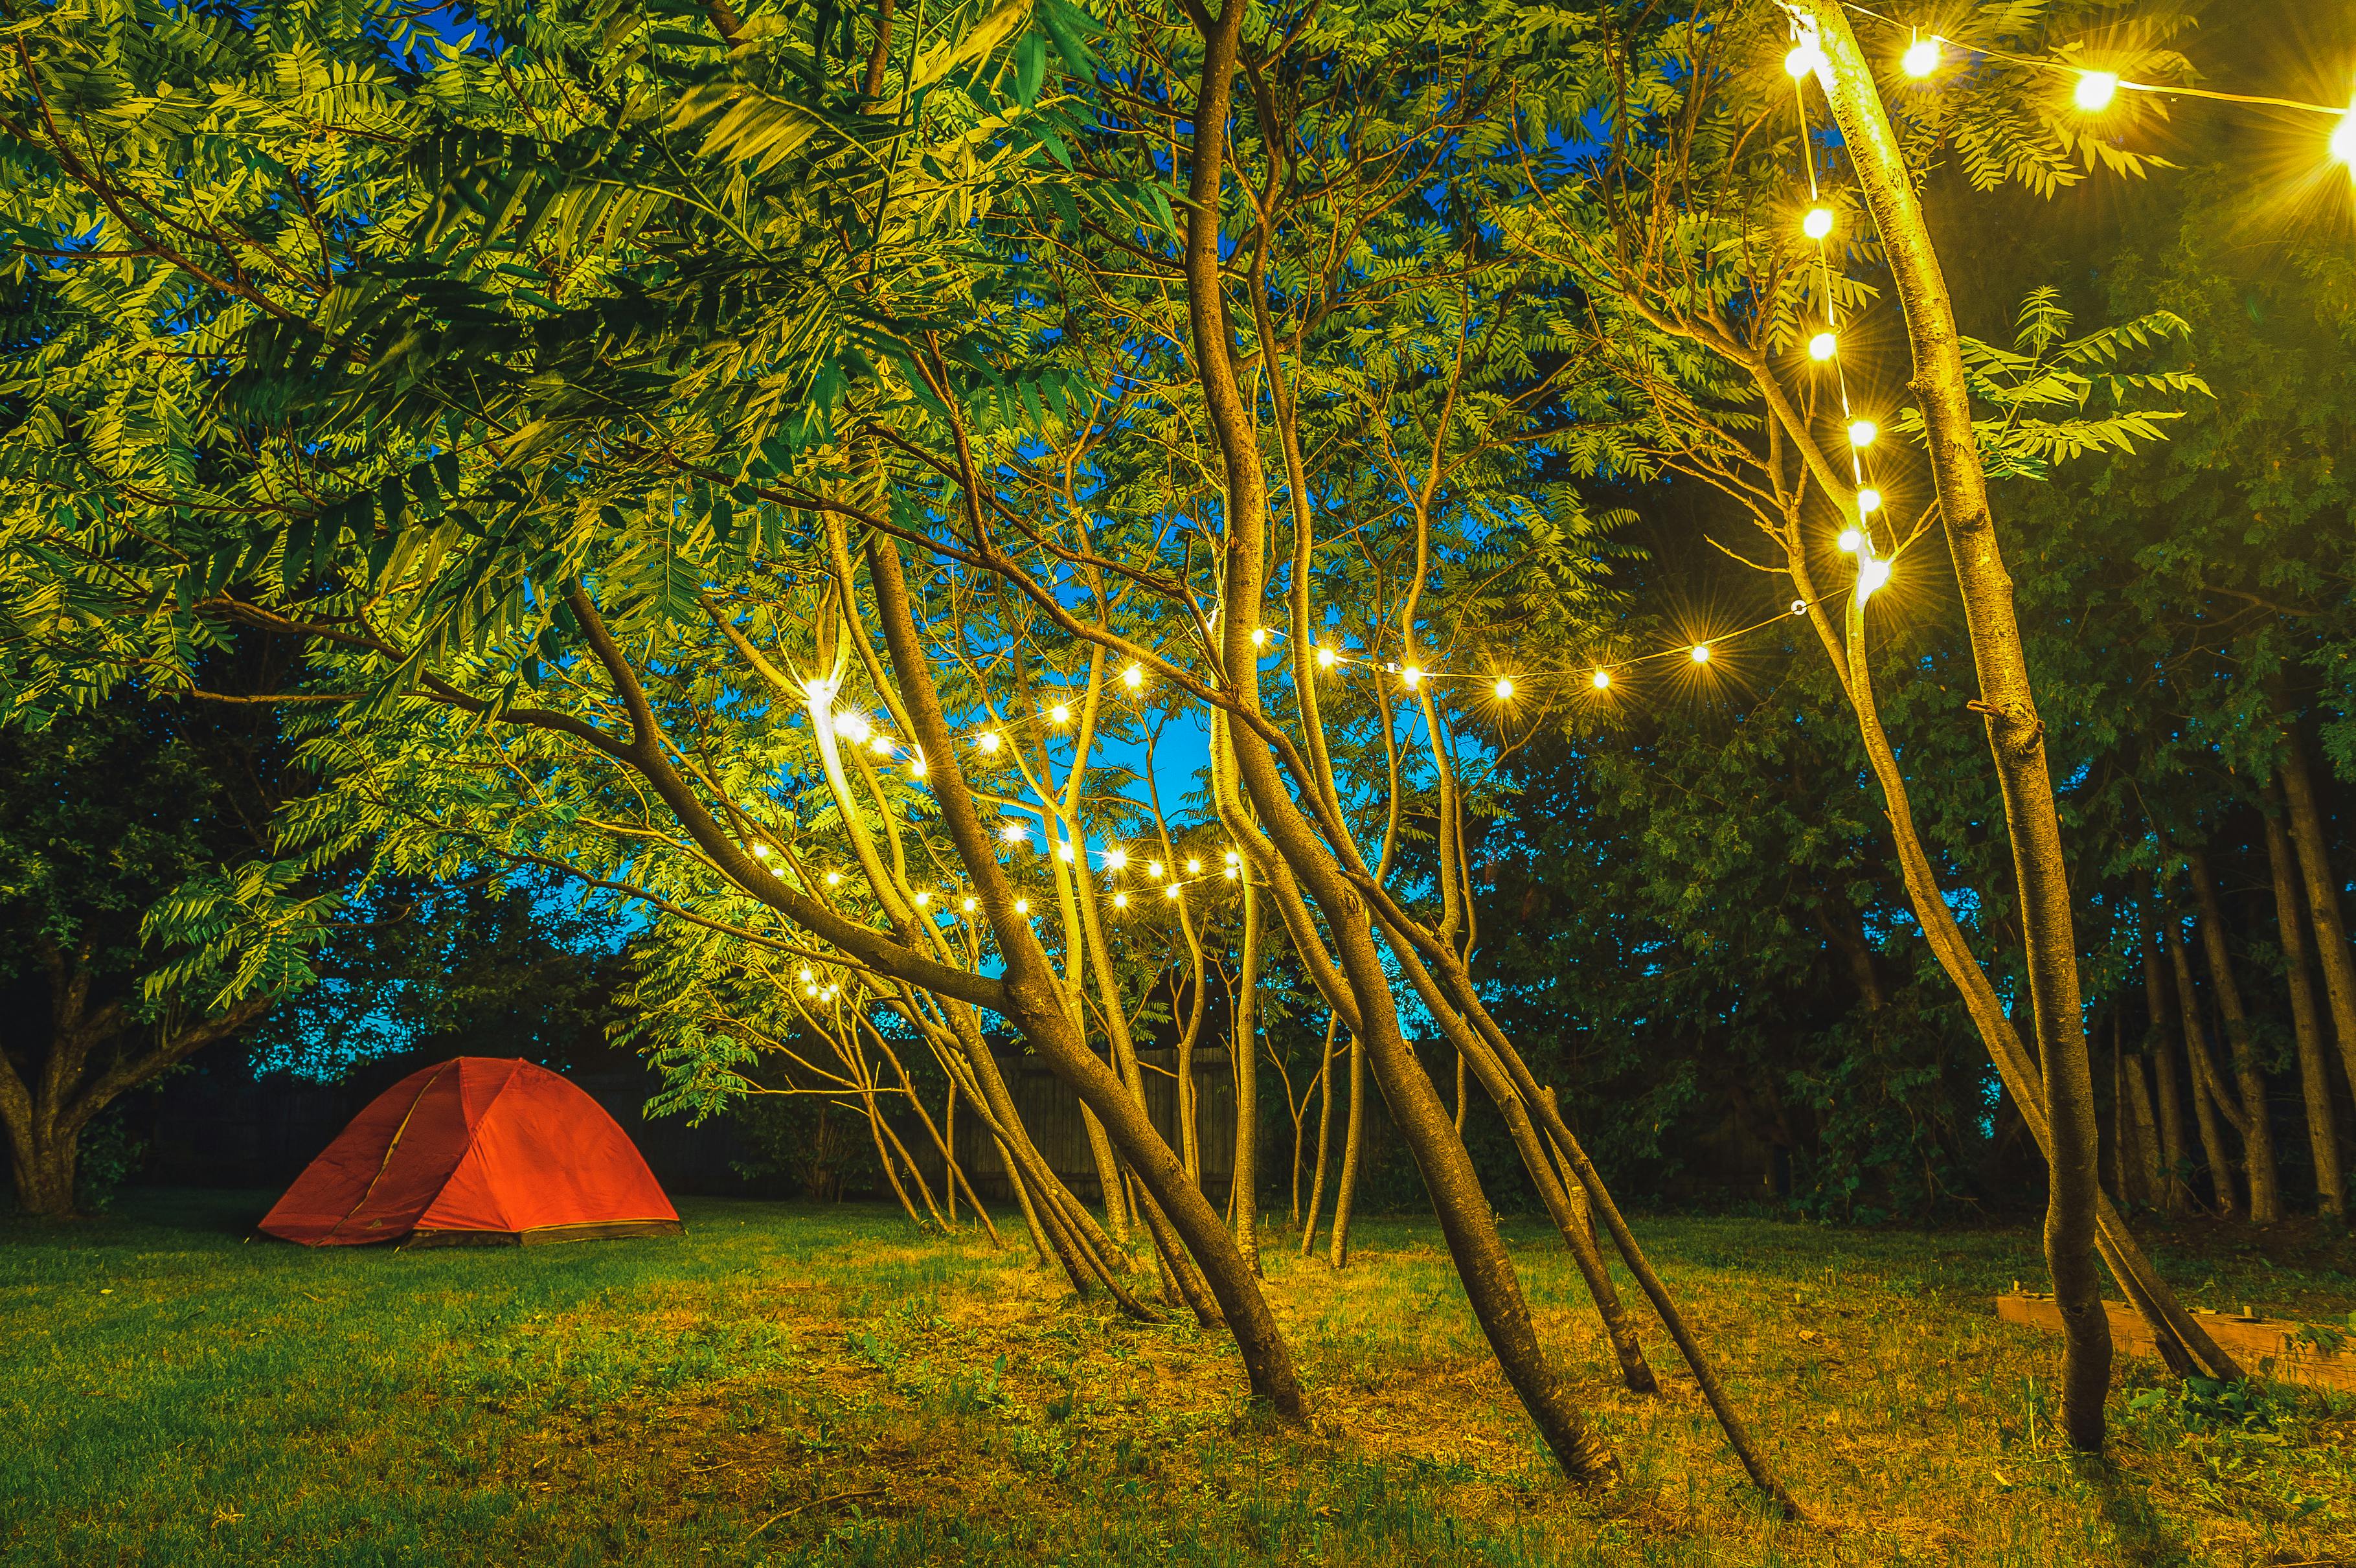 String Lights Hanging on Trees Near Dome Tent · Free Stock Photo